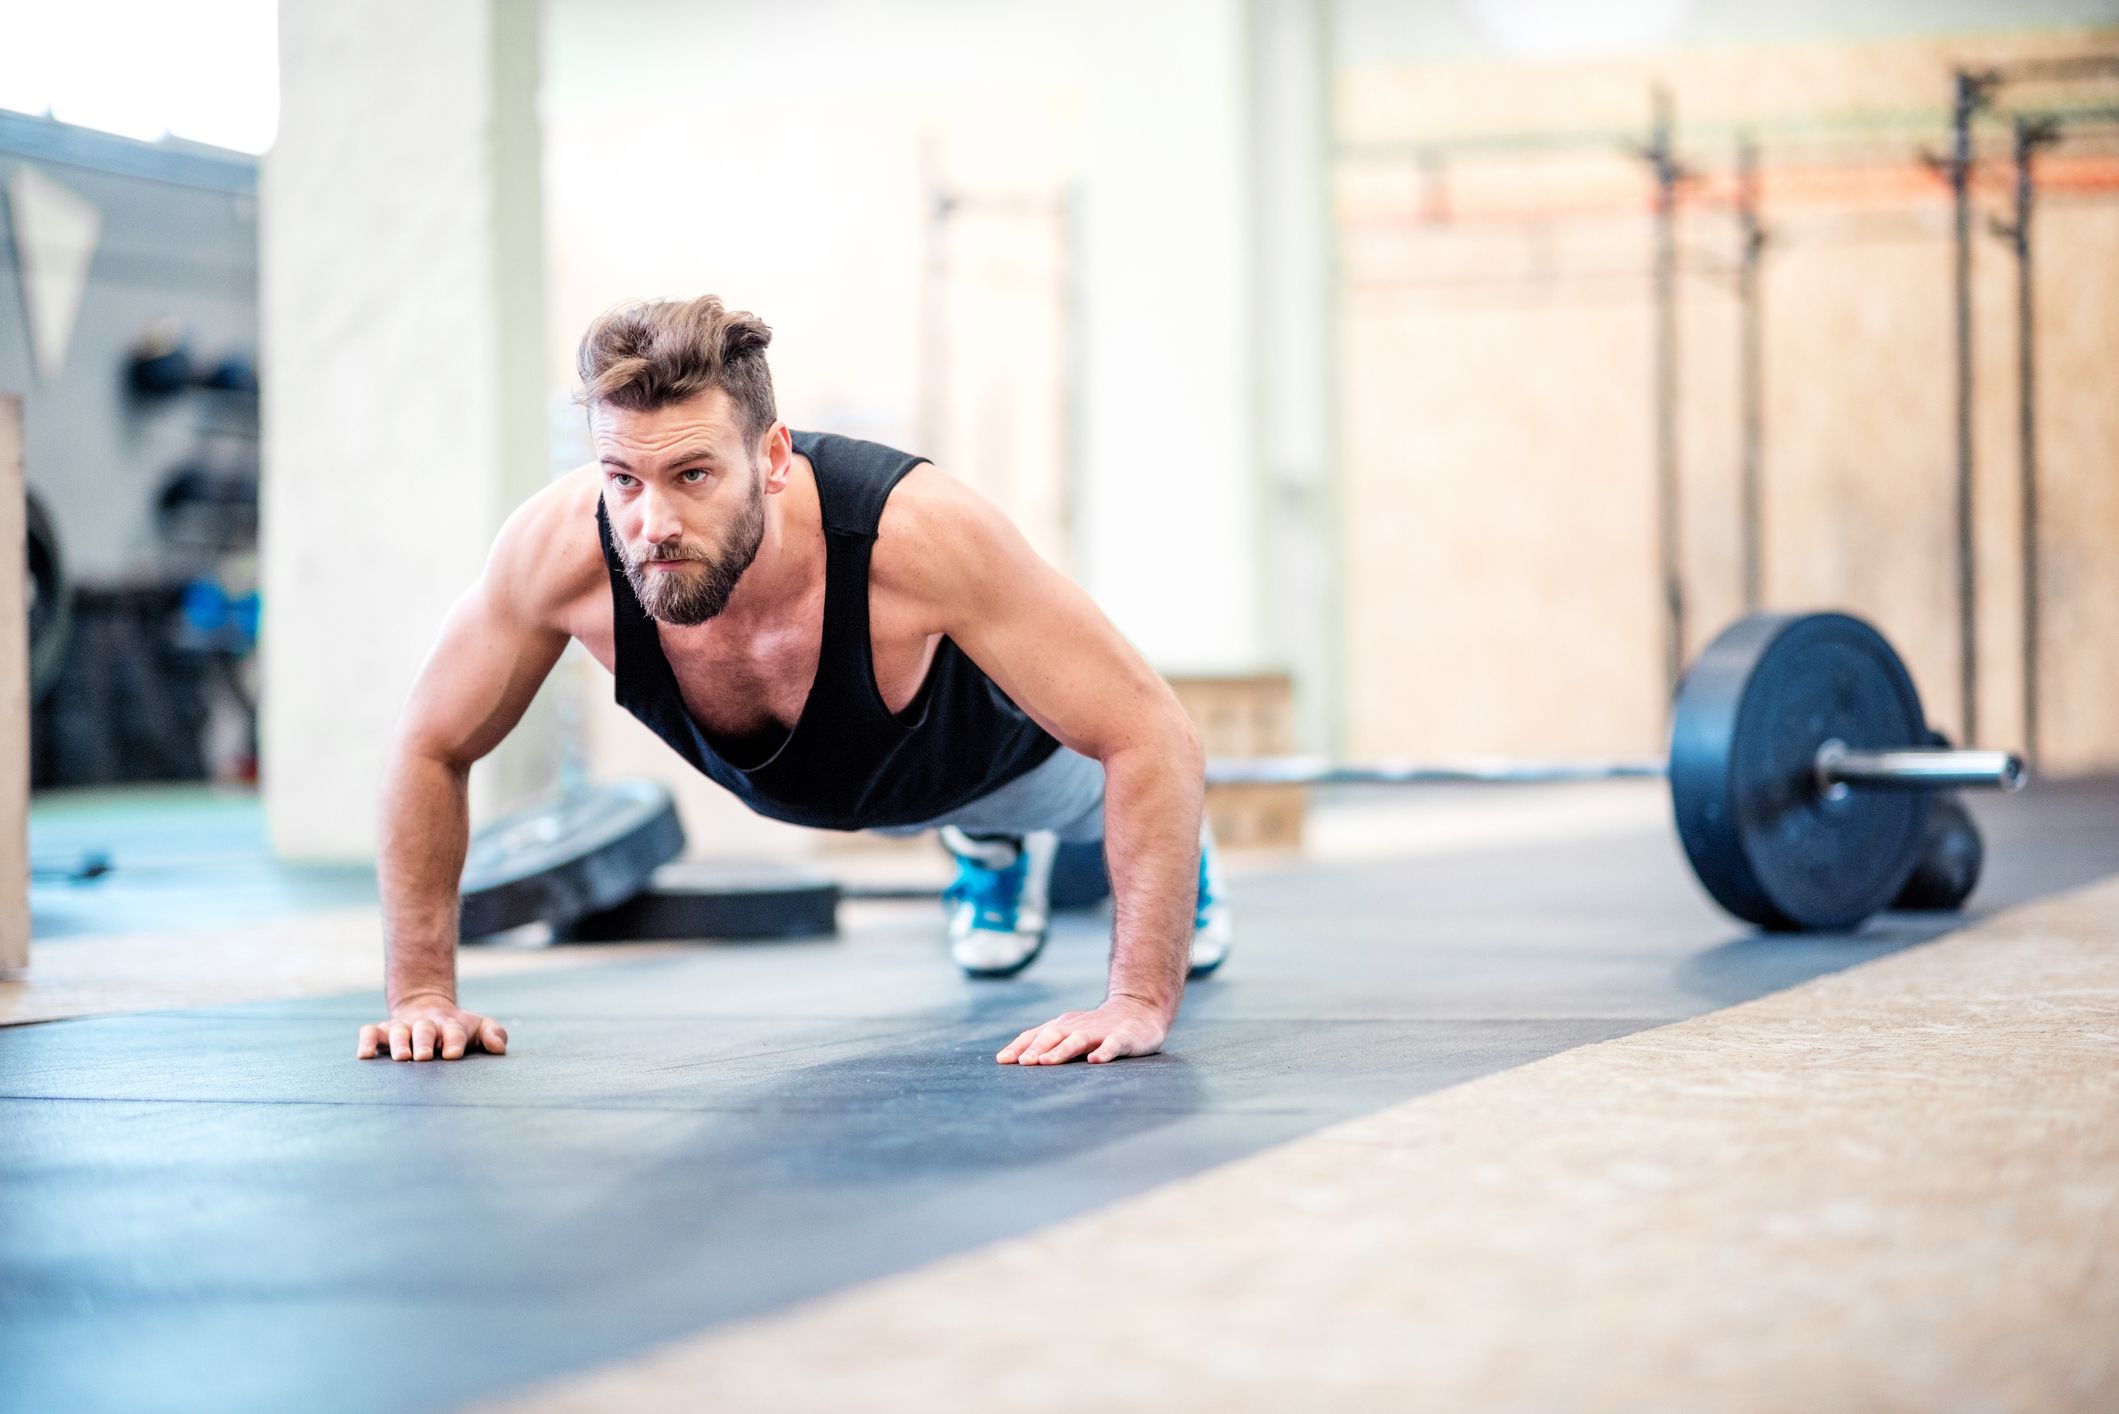 How to Prevent Lower-Back Pain During Push-Ups